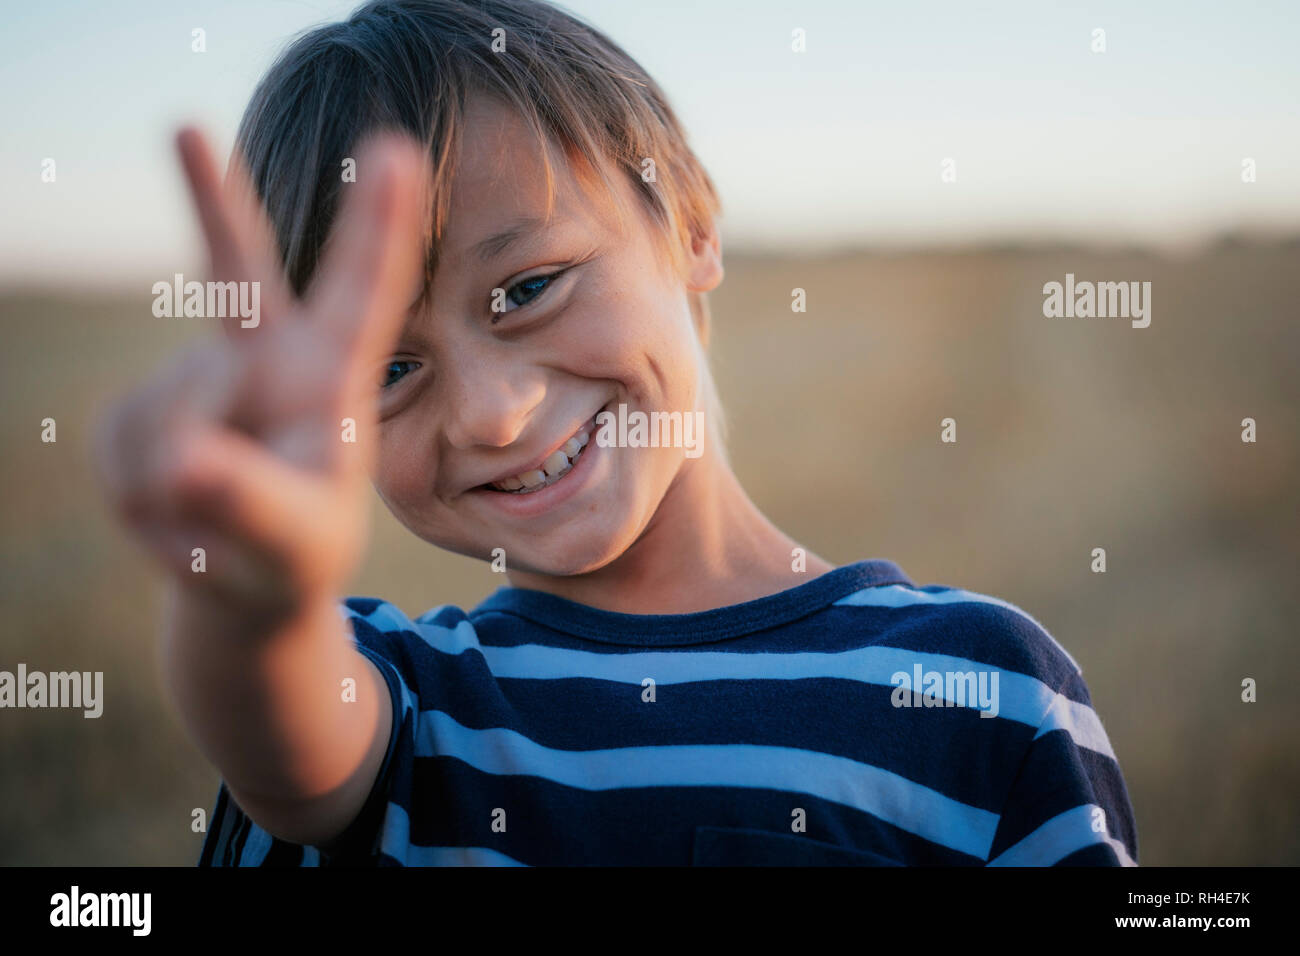 Portrait smiling, carefree boy gesturing peace sign Stock Photo